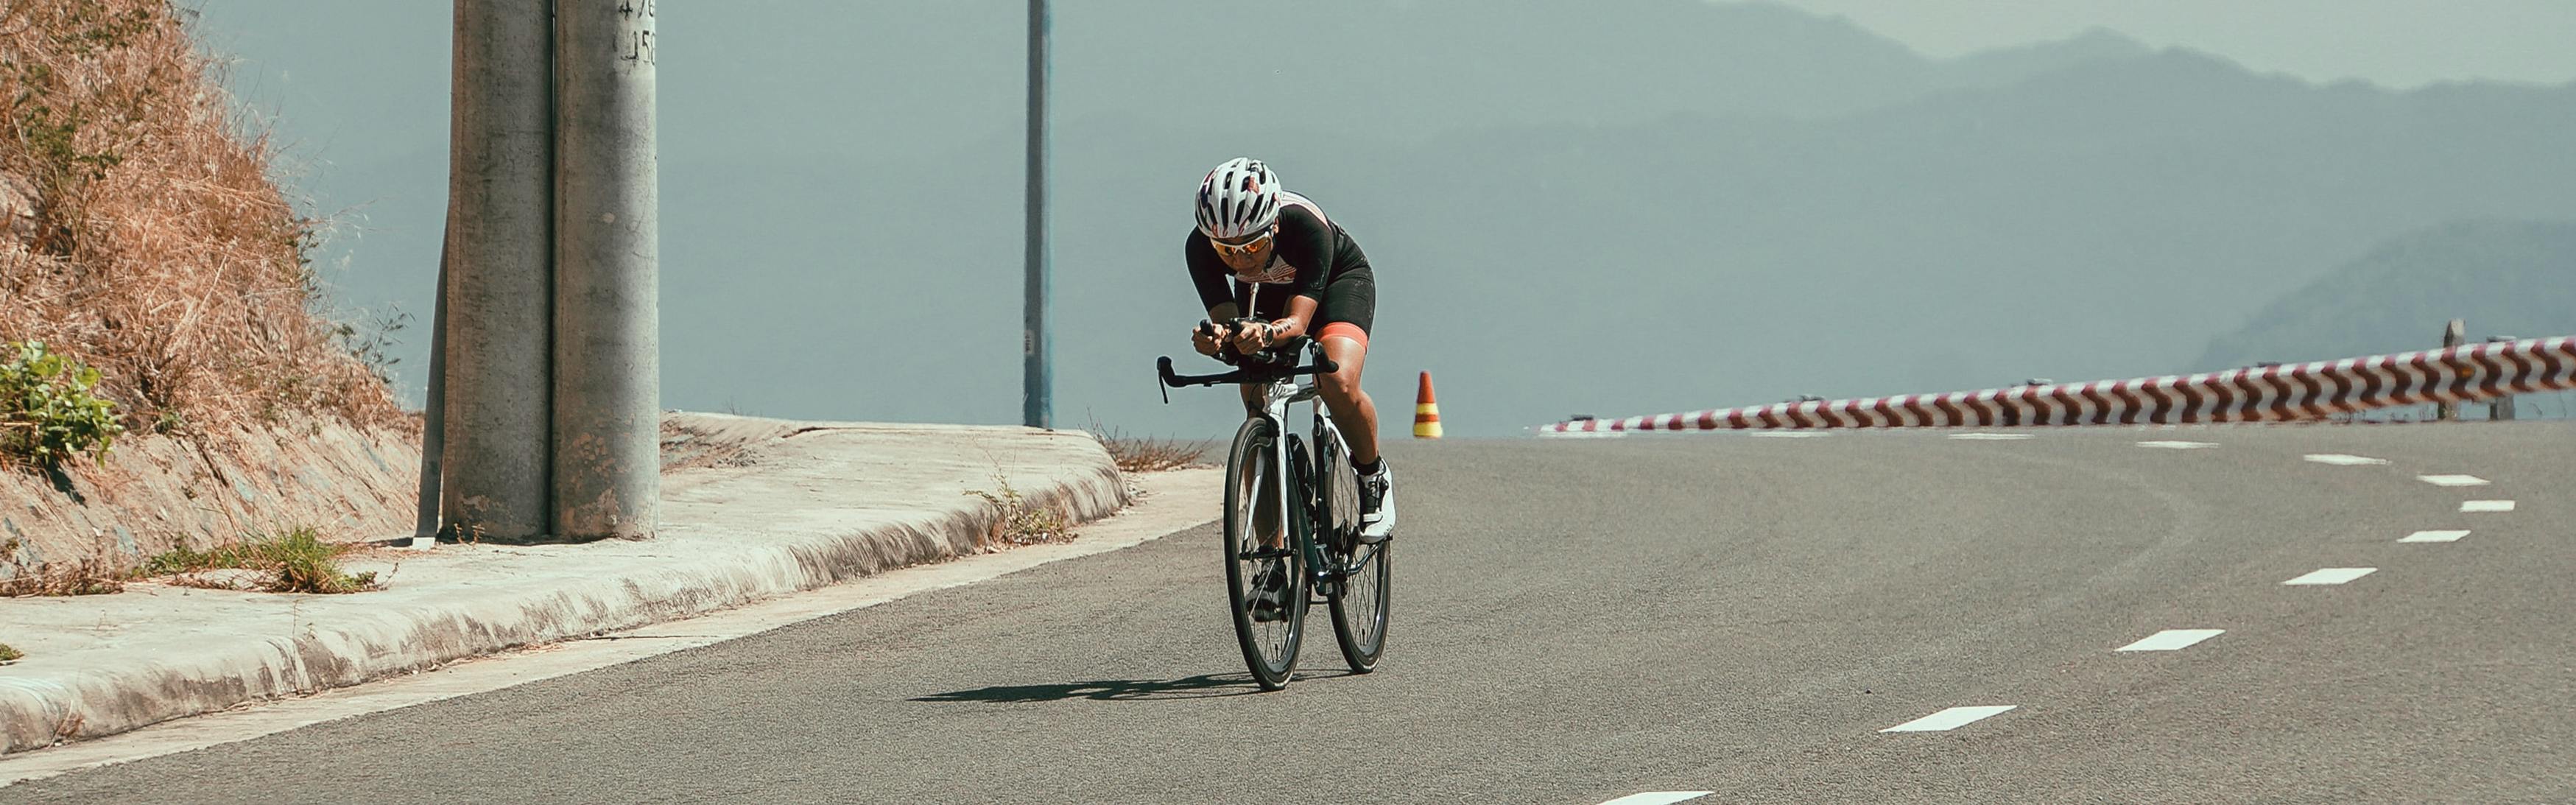 A man rides a road bike downhill with a jersey and helmet.